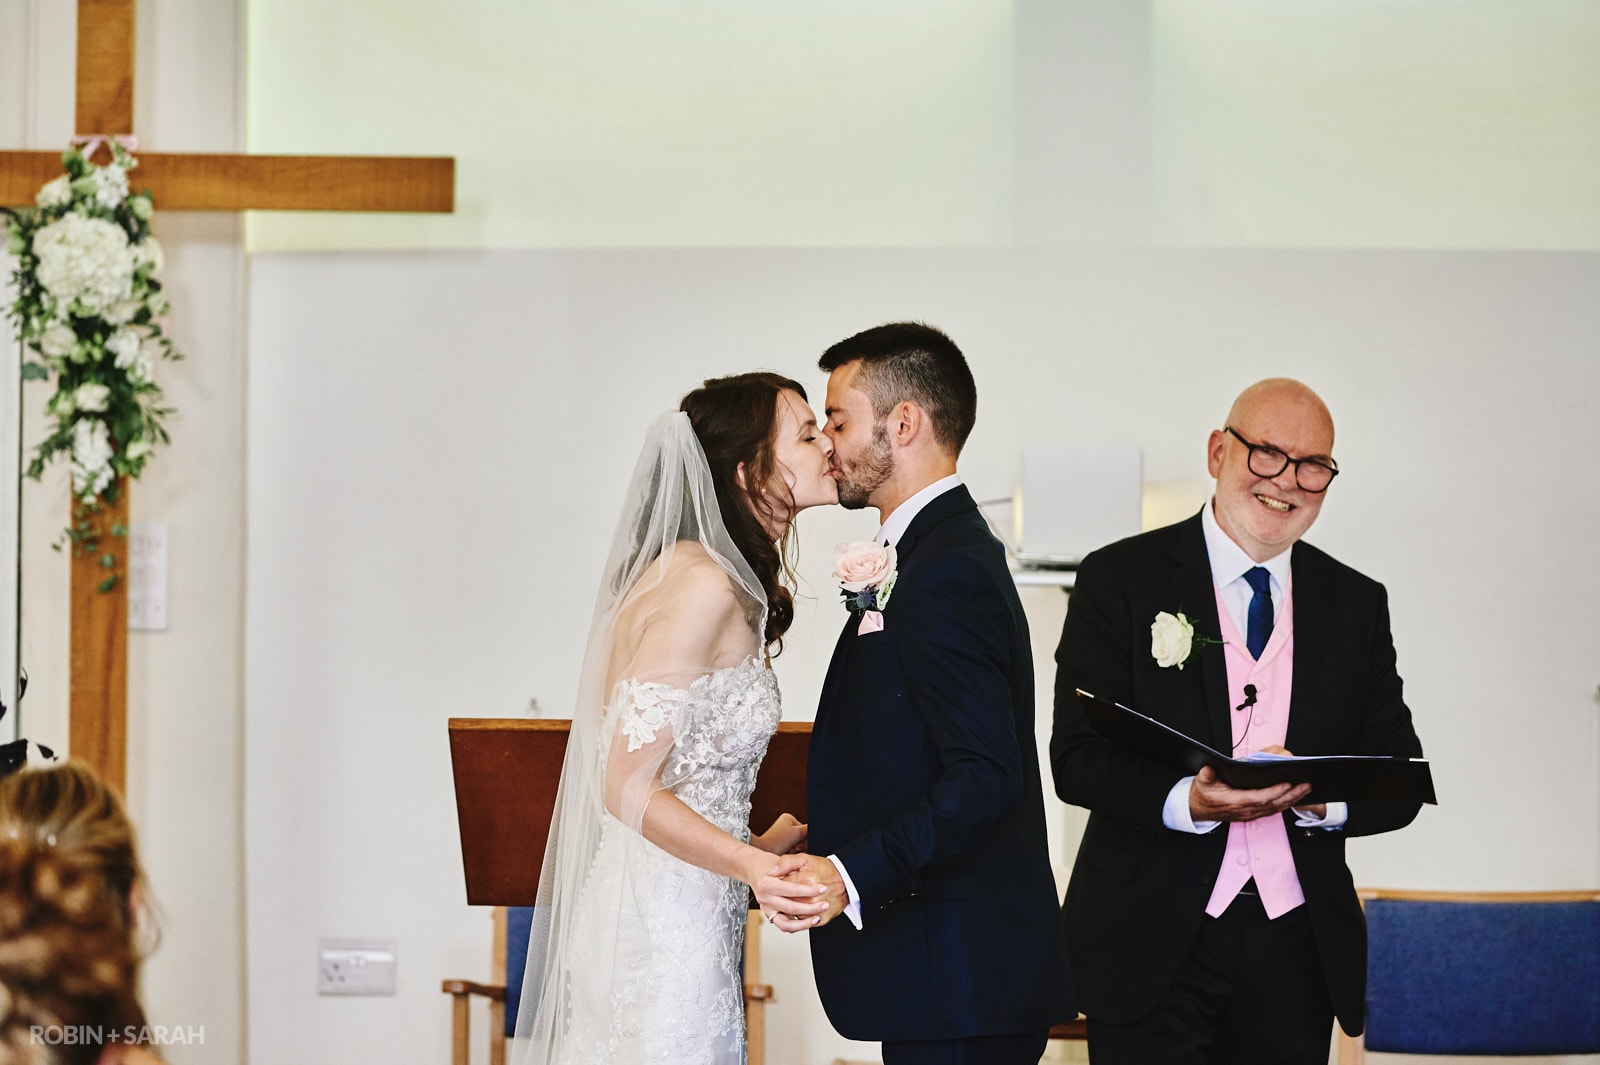 Bride and groom kiss during wedding ceremony at Long Buckby Baptist Church